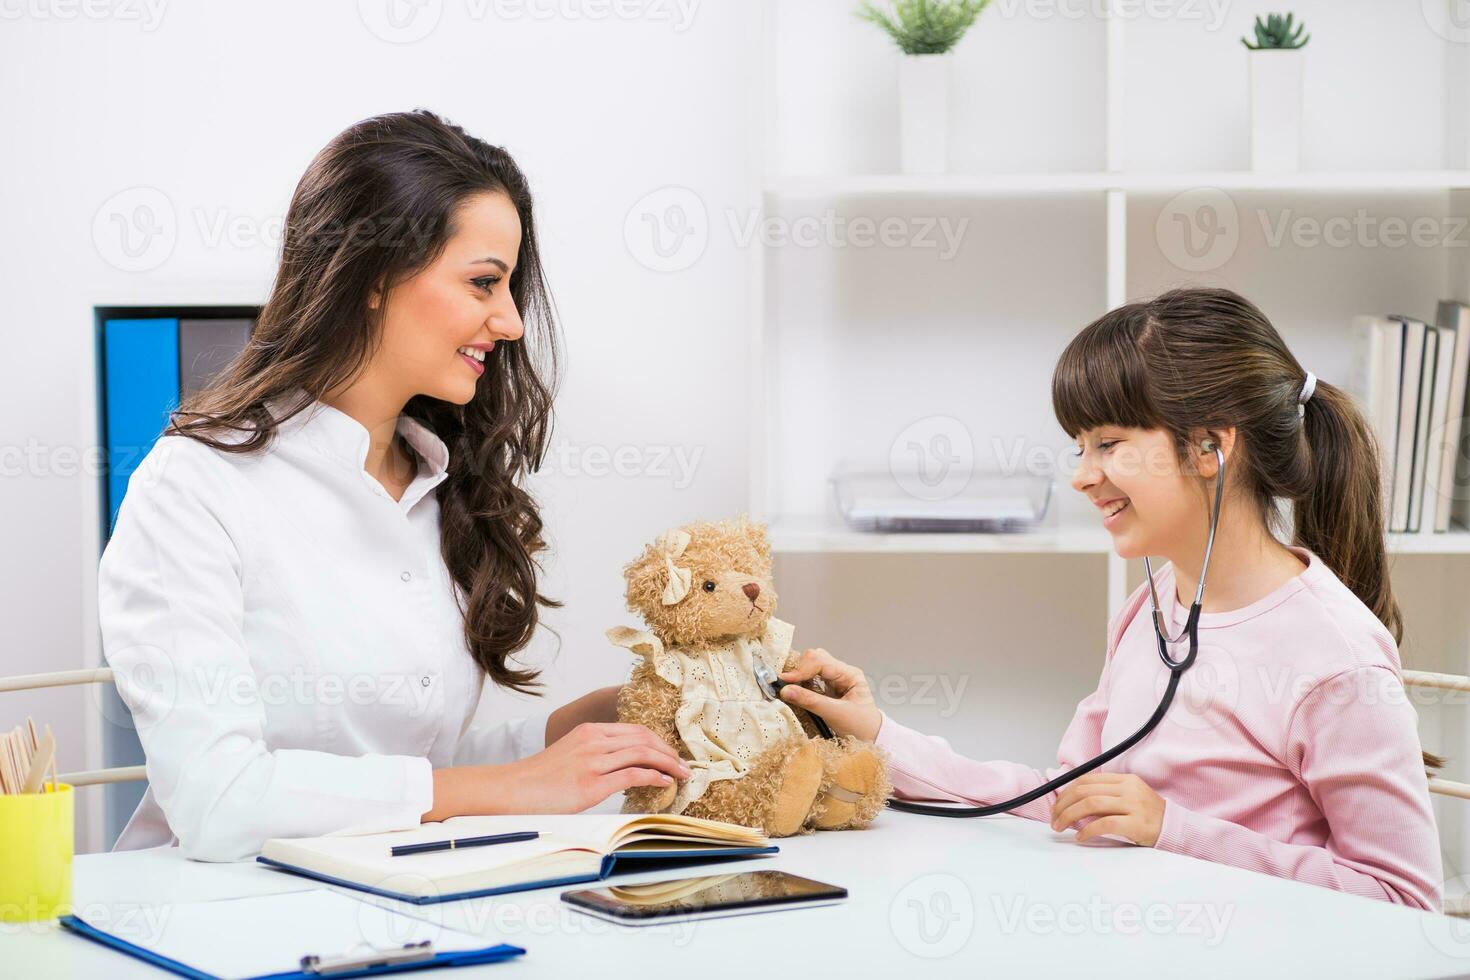 Female doctor and little girl examining teddy bear at medical office photo